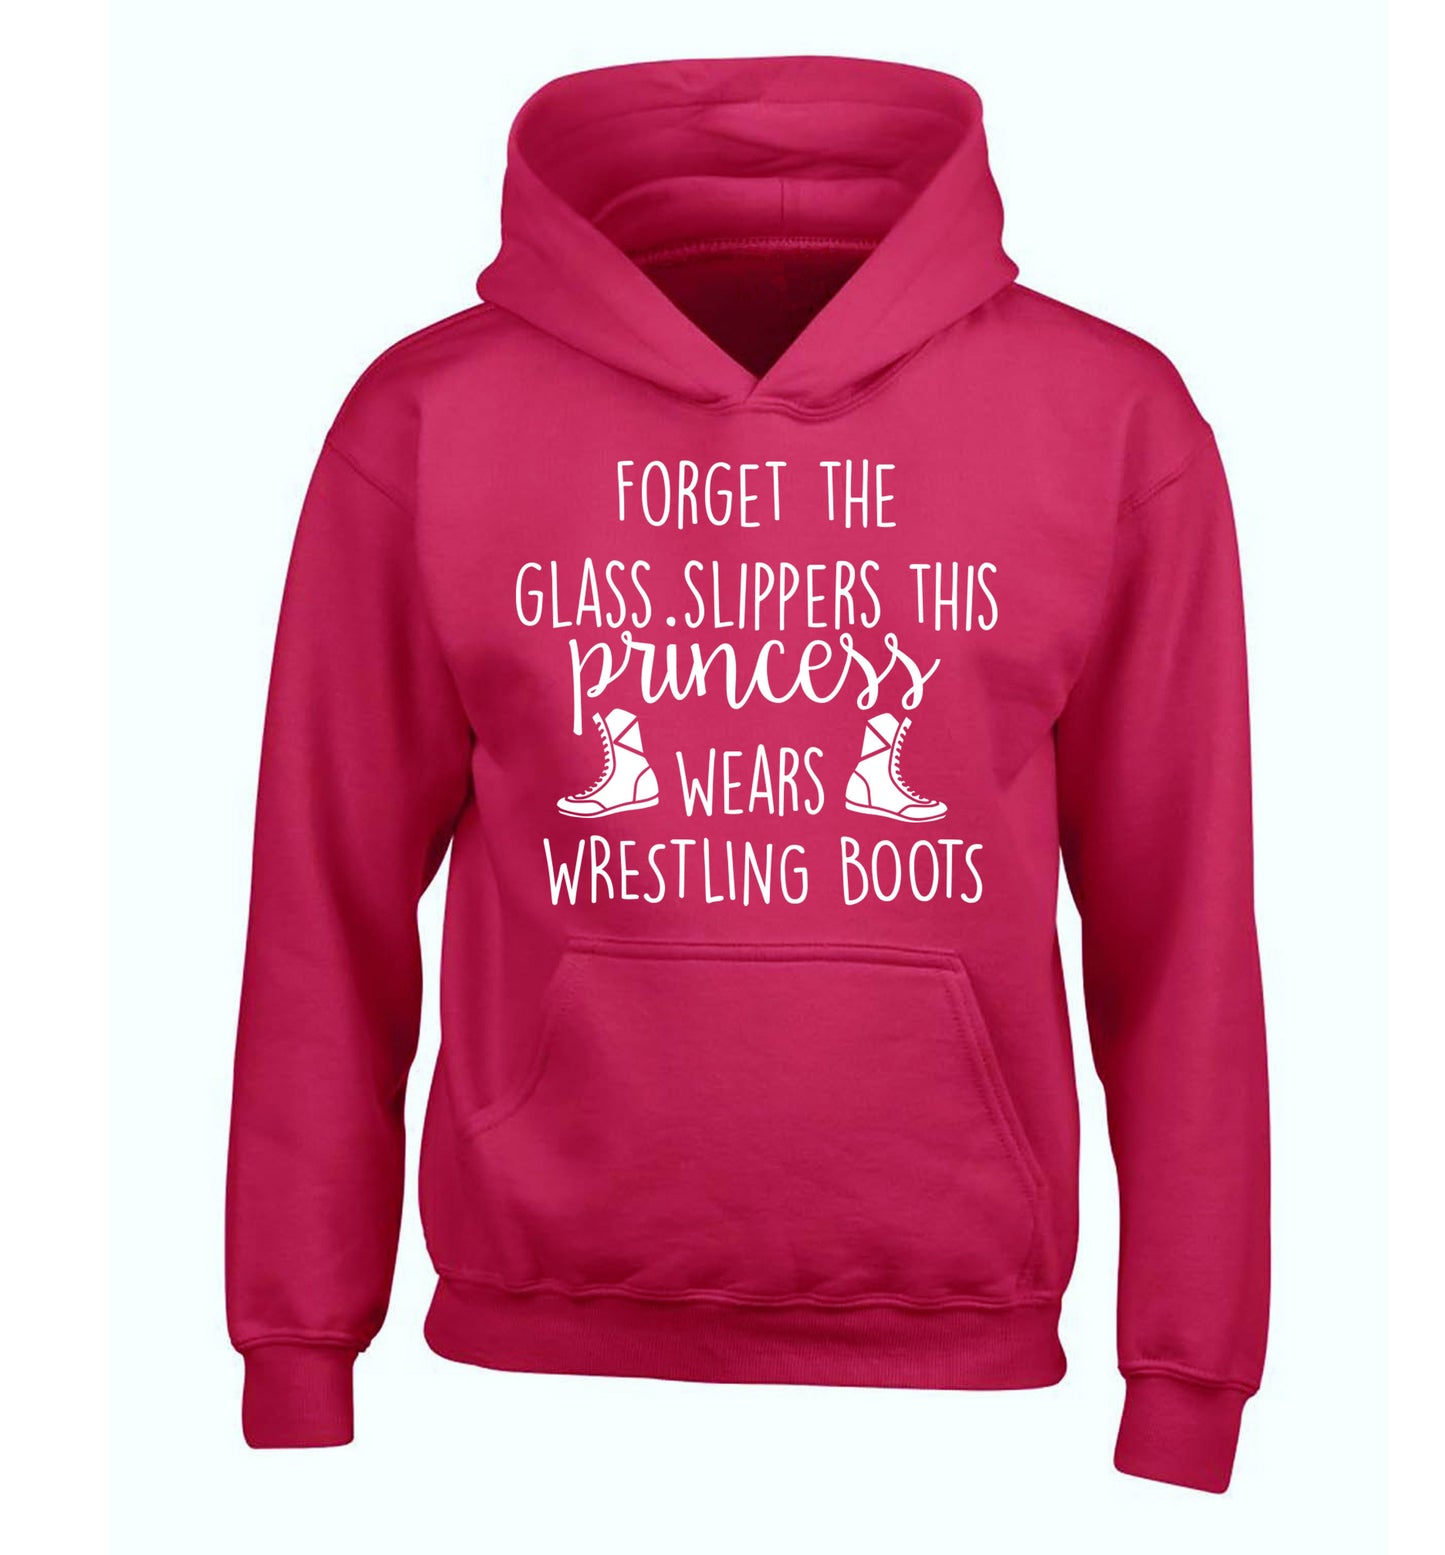 Forget the glass slippers this princess wears wrestling boots children's pink hoodie 12-14 Years